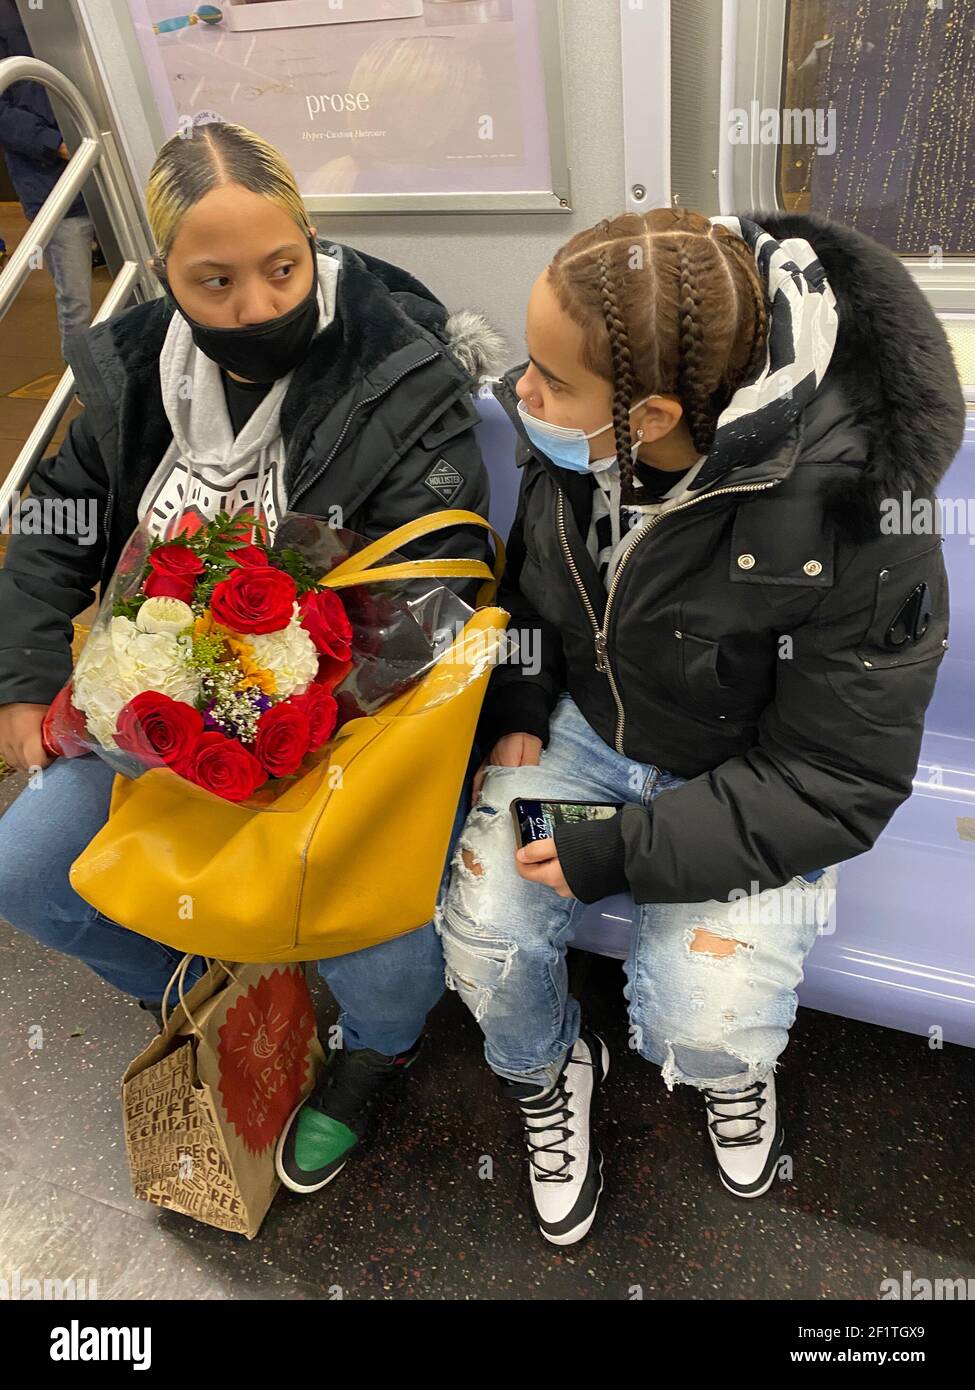 Mother and daughter with a bouquet of flowers ride a New York City subway train during the beginning of the 2nd year of the Covid-19 pandemic. Stock Photo